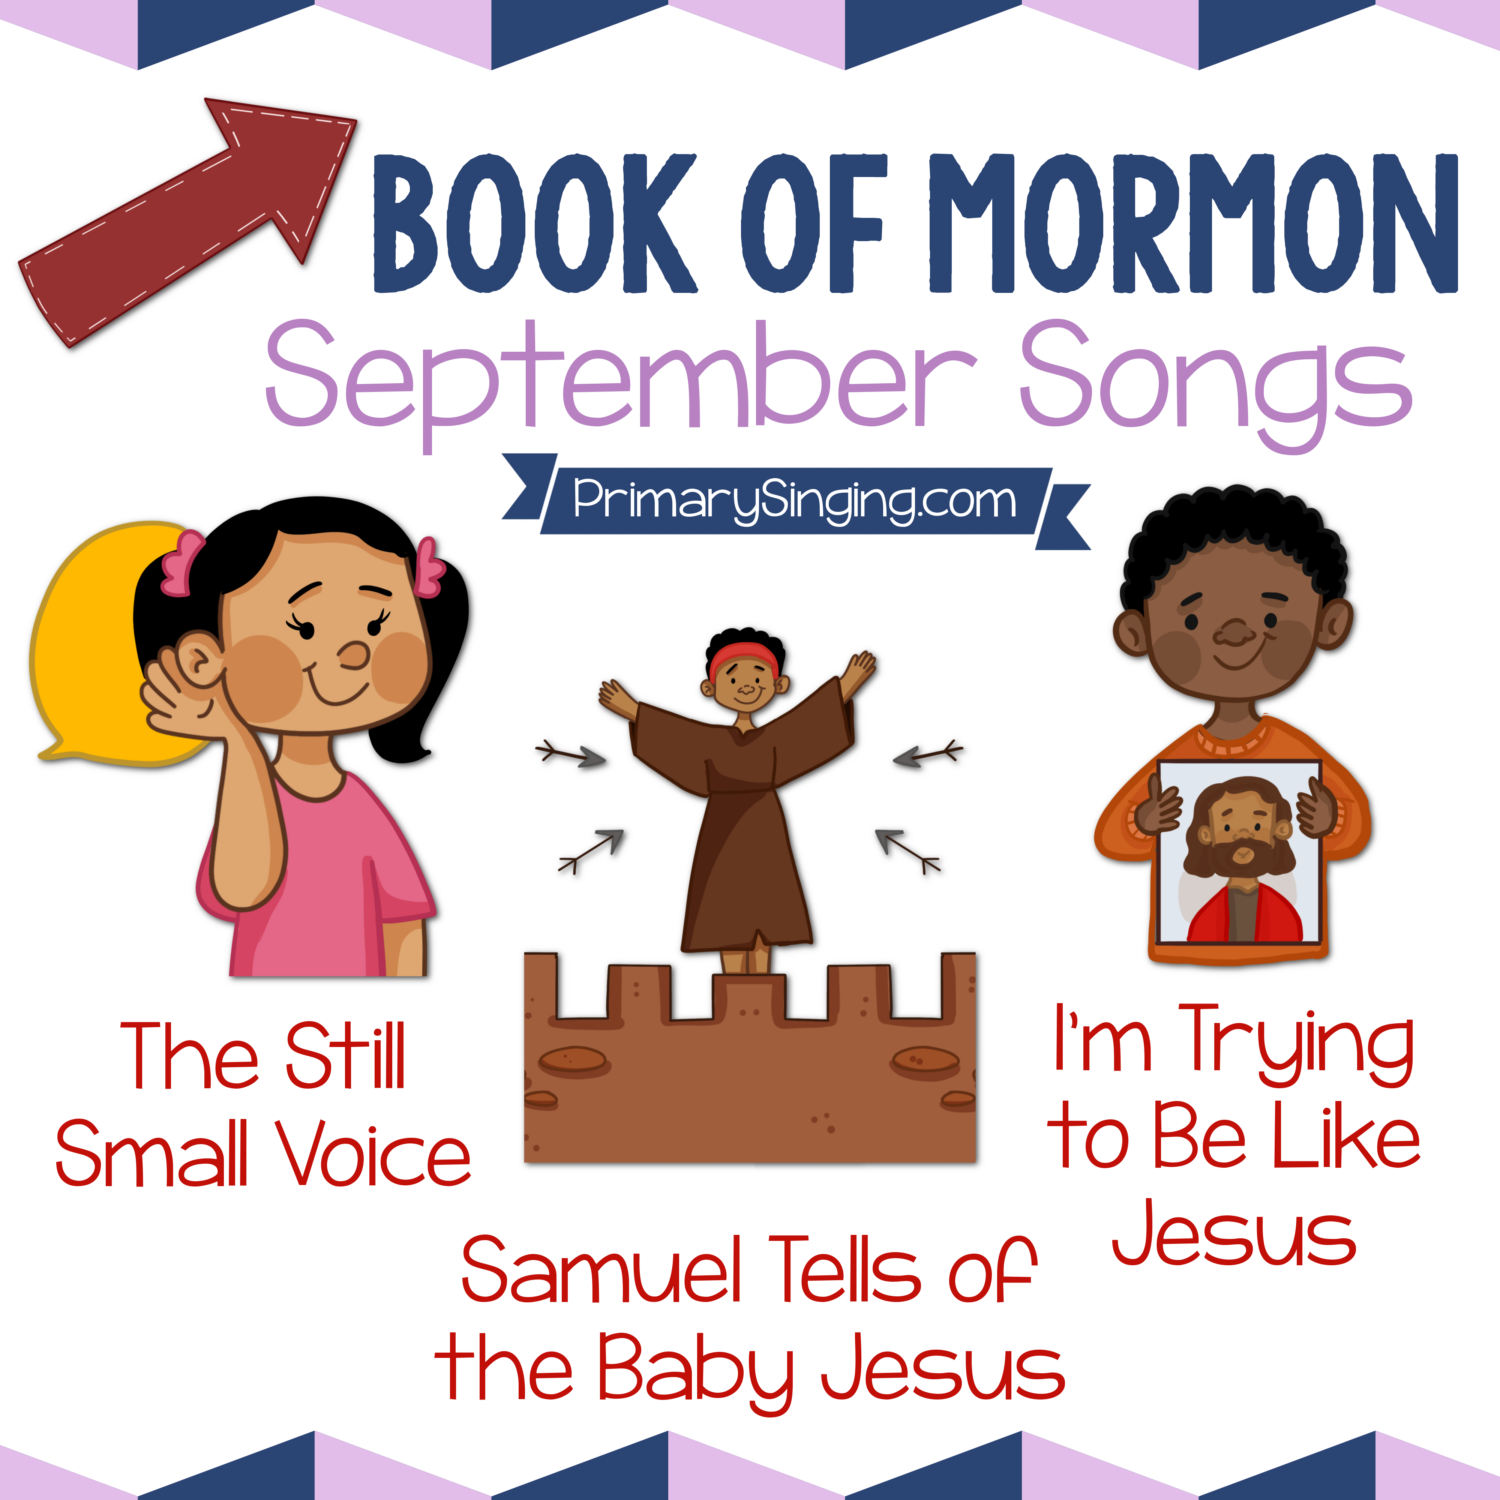 Book of Mormon September Song List - The Still Small Voice, Samuel Tells of the Baby Jesus, and I'm Trying to Be Like Jesus. Teach these 3 great Primary songs during Singing Time or home Come Follow Me lessons.